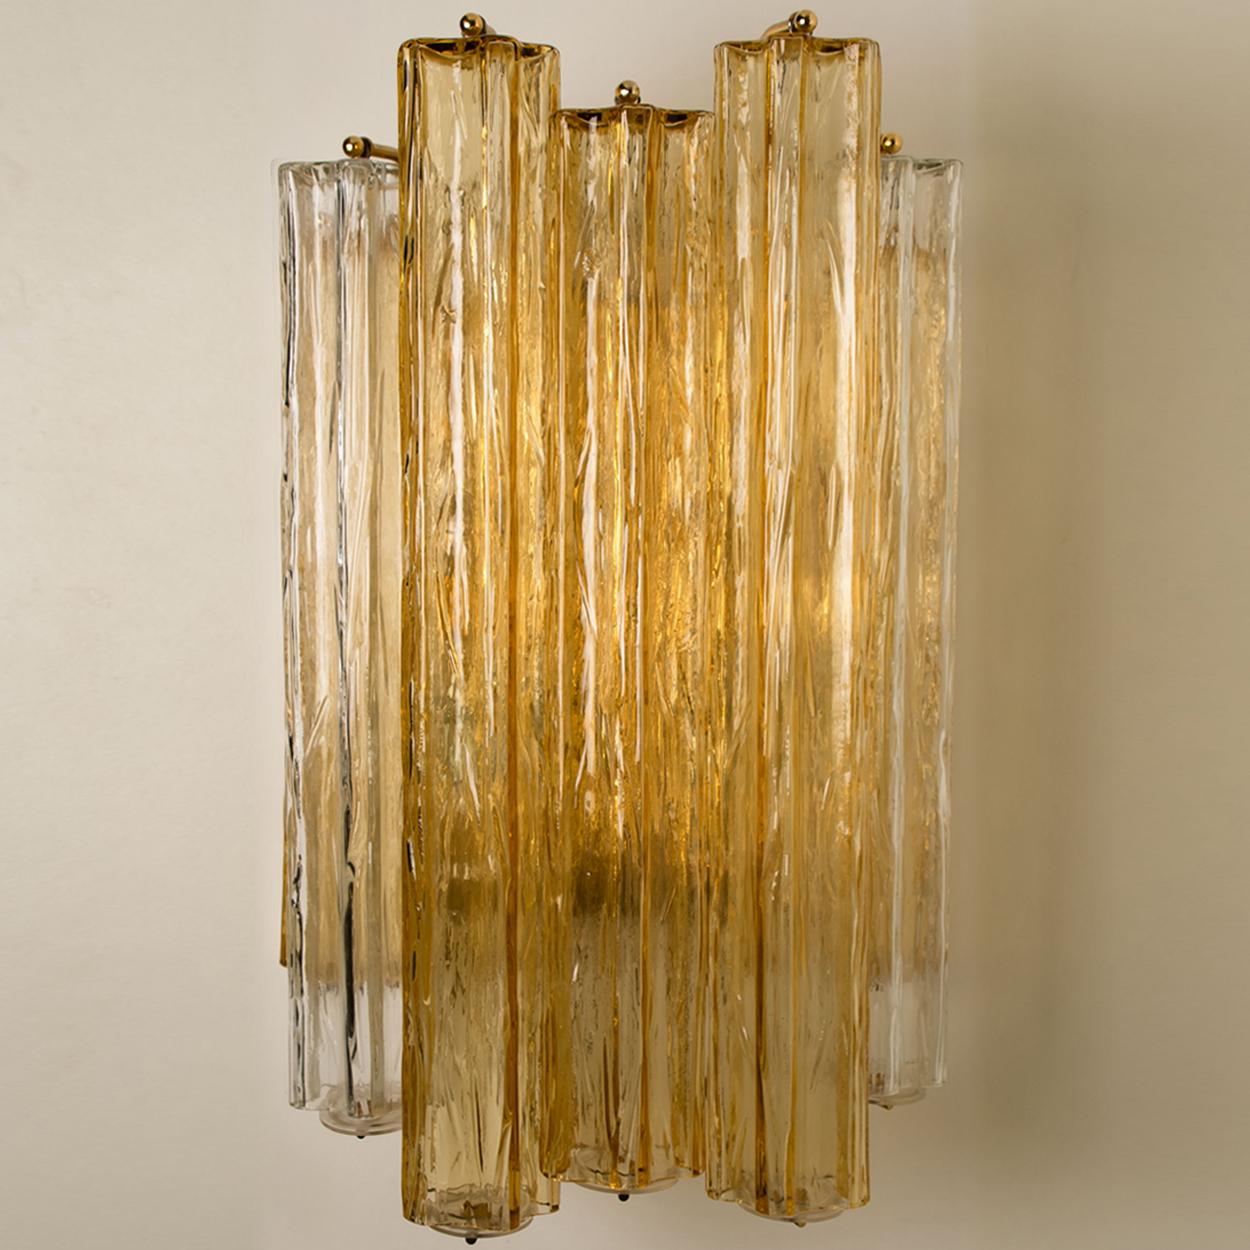 Mid-Century Modern 1 of the 4 Extra Large Wall Sconces or Wall Lights Murano Glass, Barovier & Toso